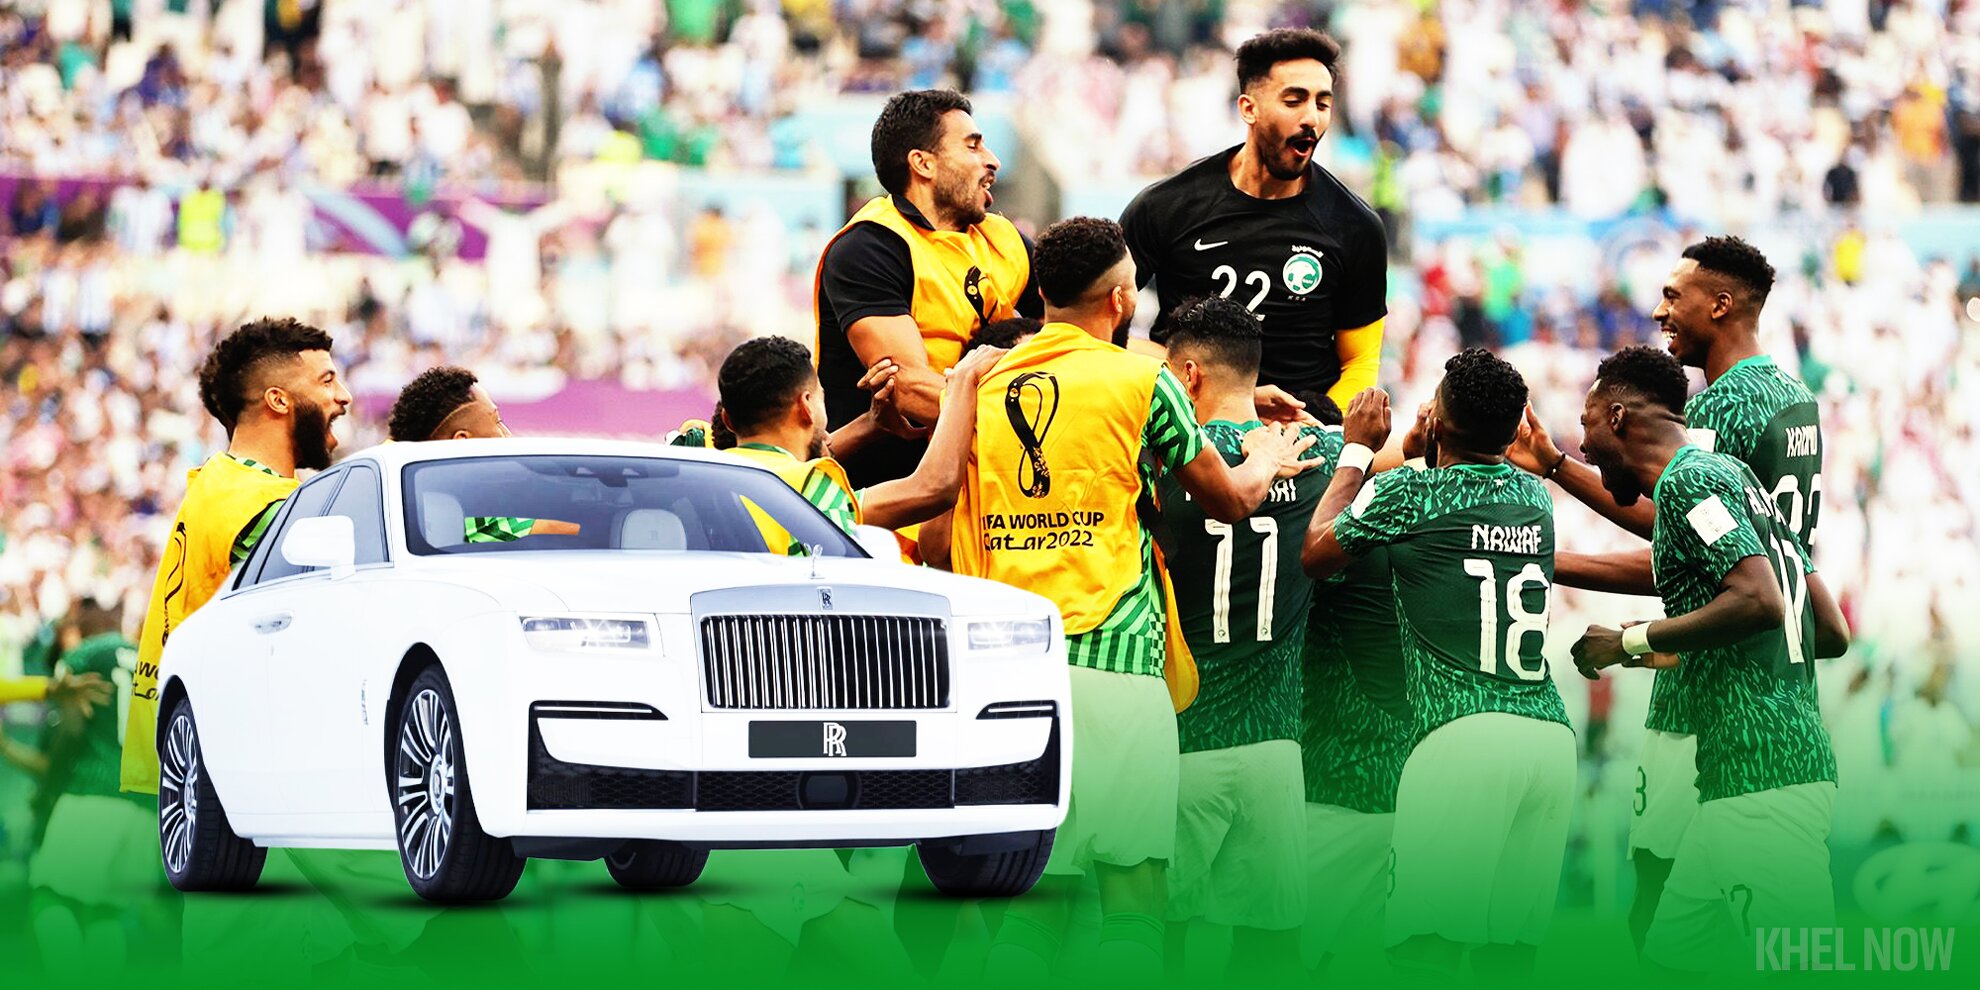 Saudi players to be rewarded with 'Rolls Royce' for amazing win against Argentina